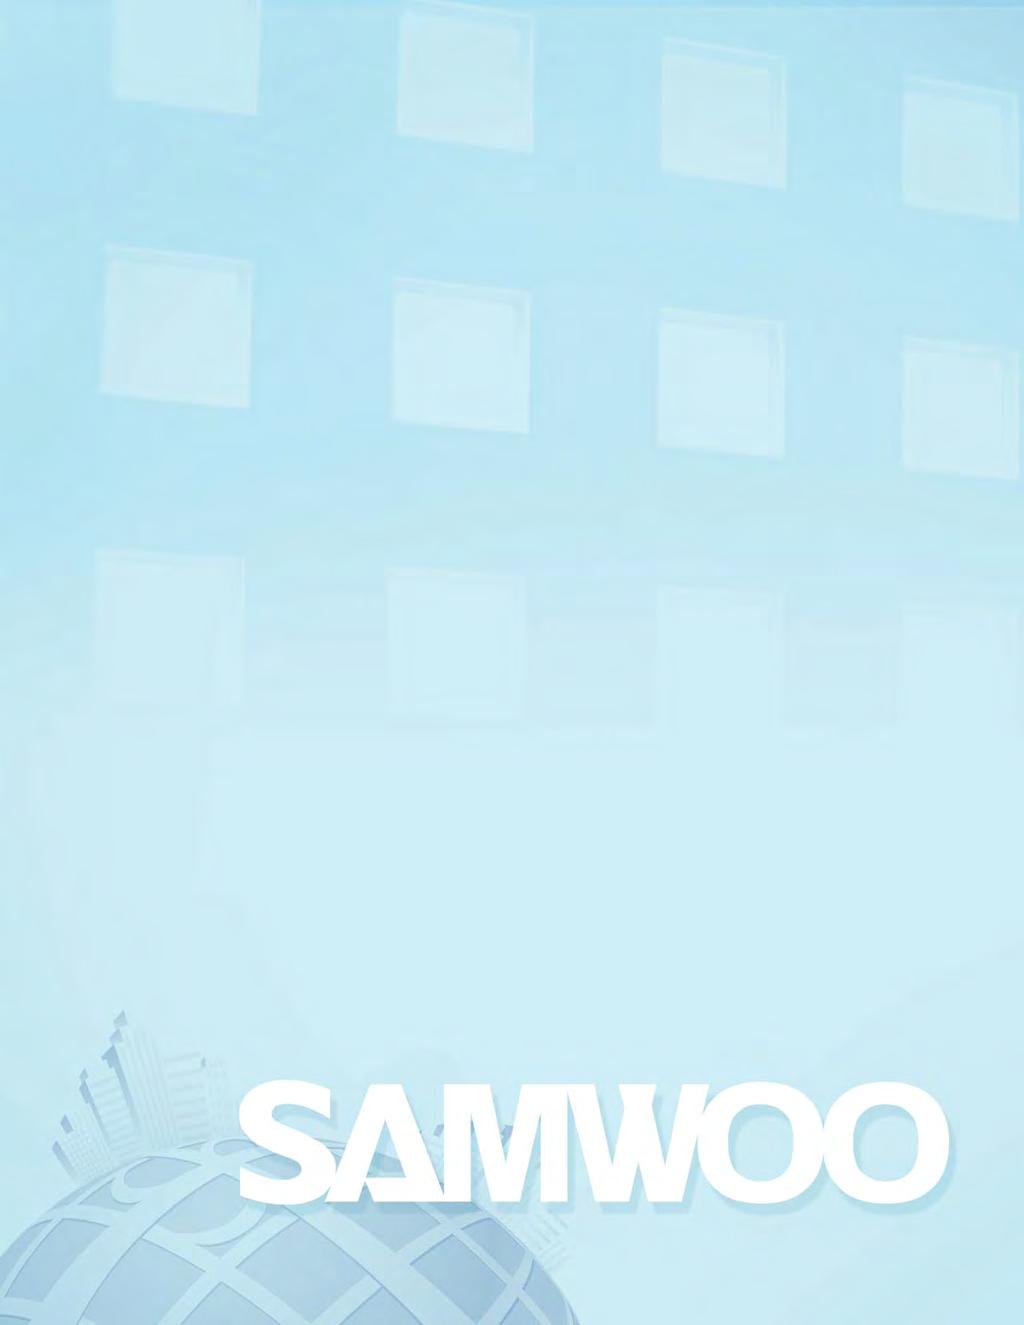 CEO MESSAGE Greeting from the CEO Having dedicated efforts to be the best in the ground anchor field over the last 20 years, Samwoo is endeavoring to enable safe and economical installations.